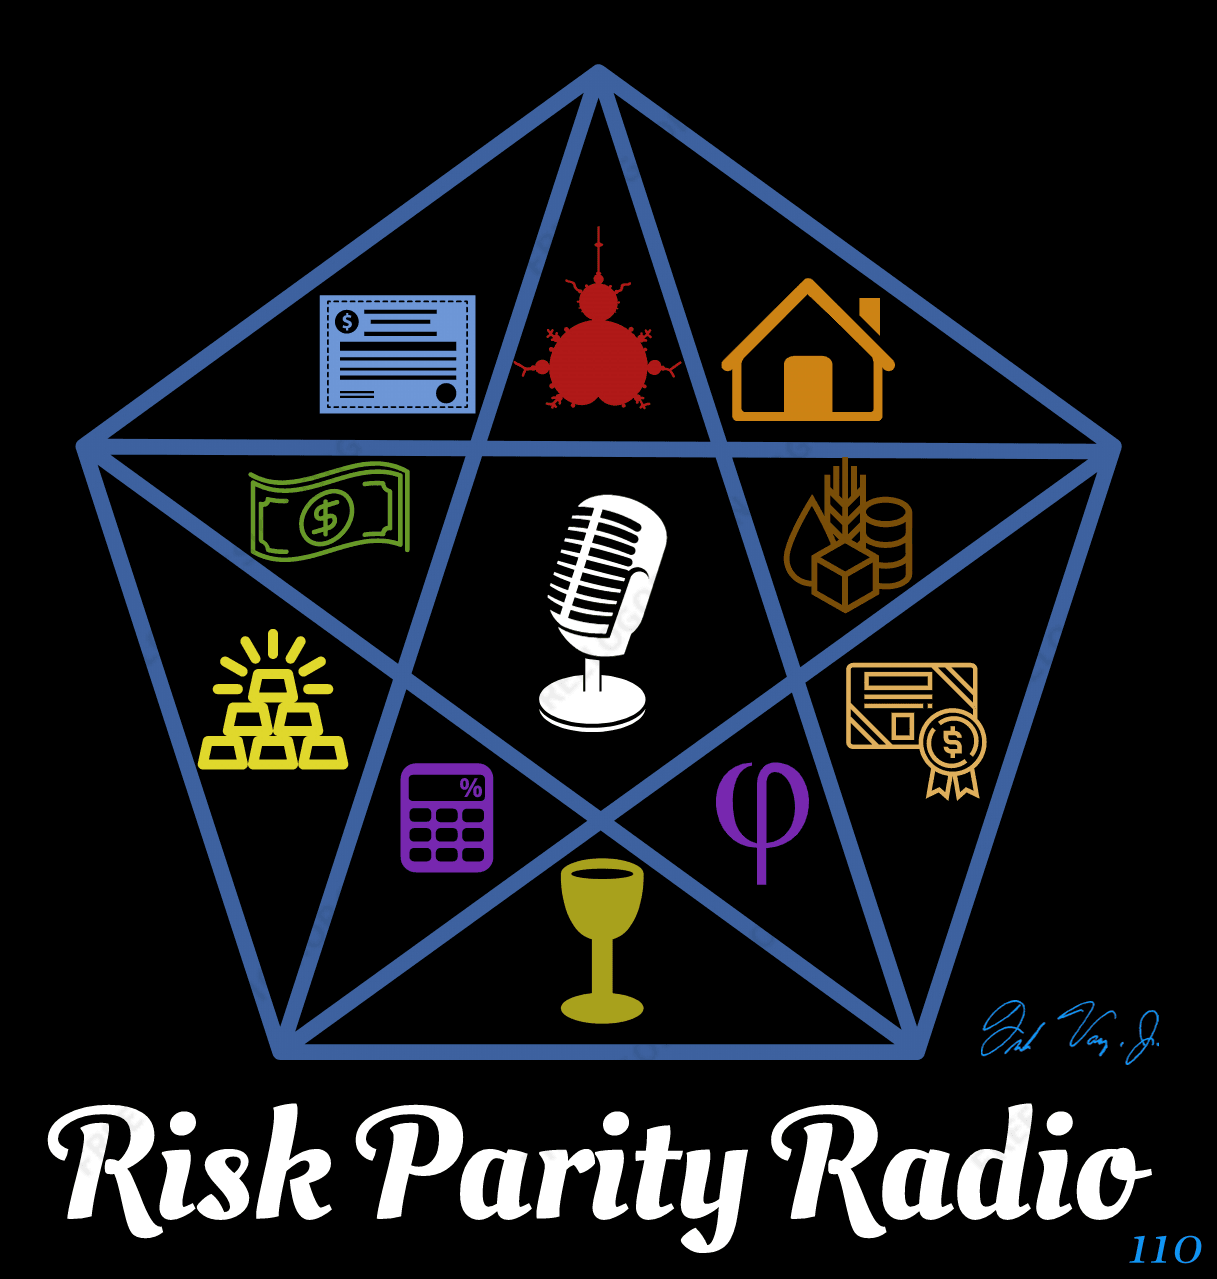 Limited Edition Risk Parity Radio Autographed Print #110